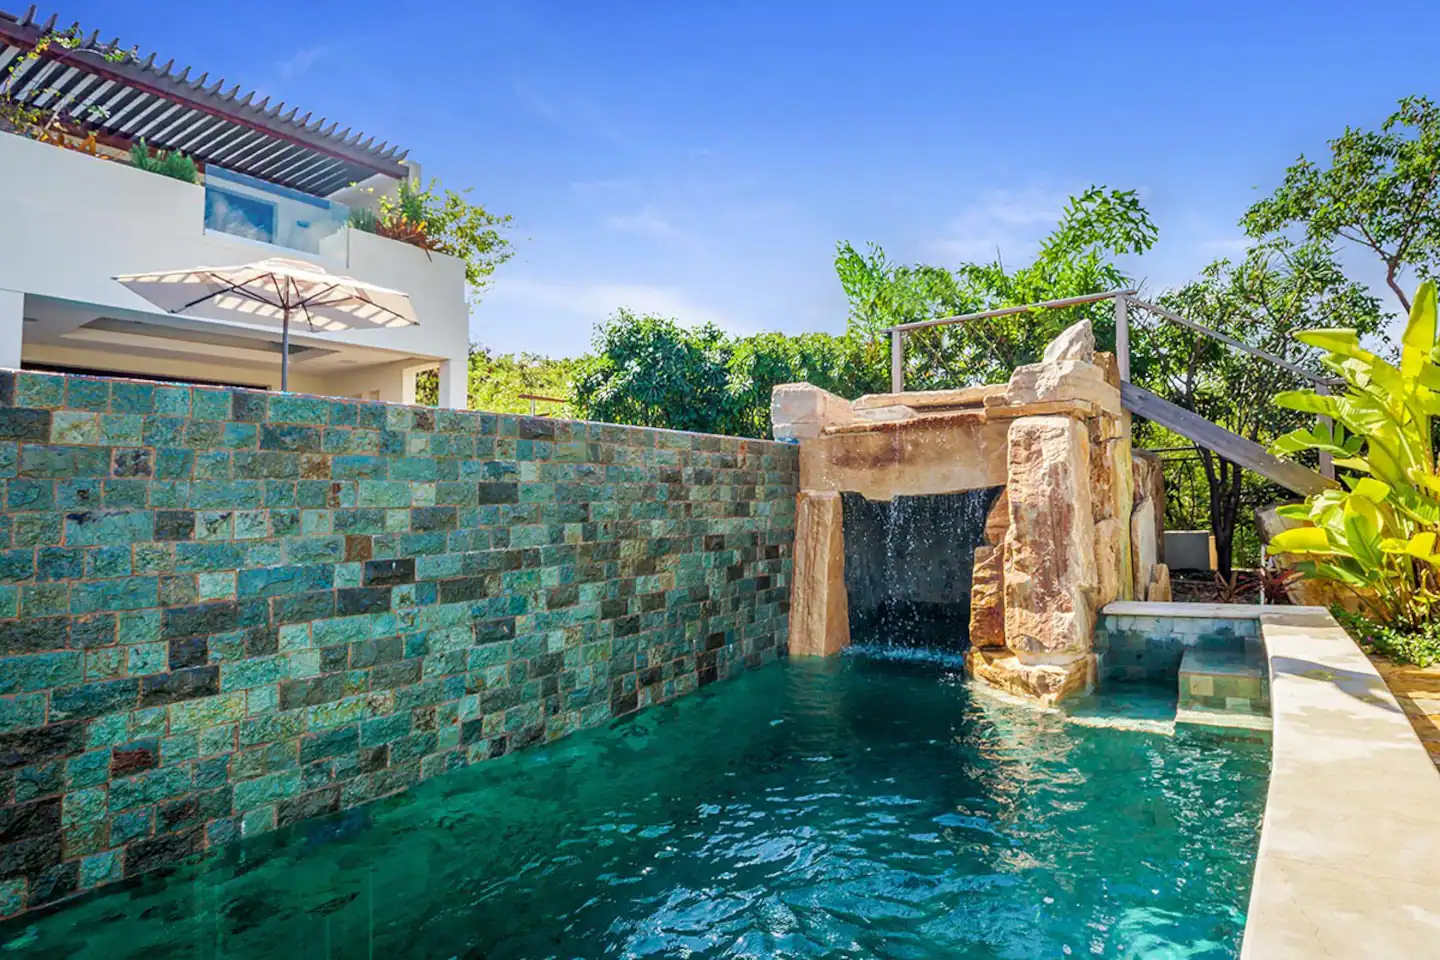 A stunning lower pool with a cascading waterfall.